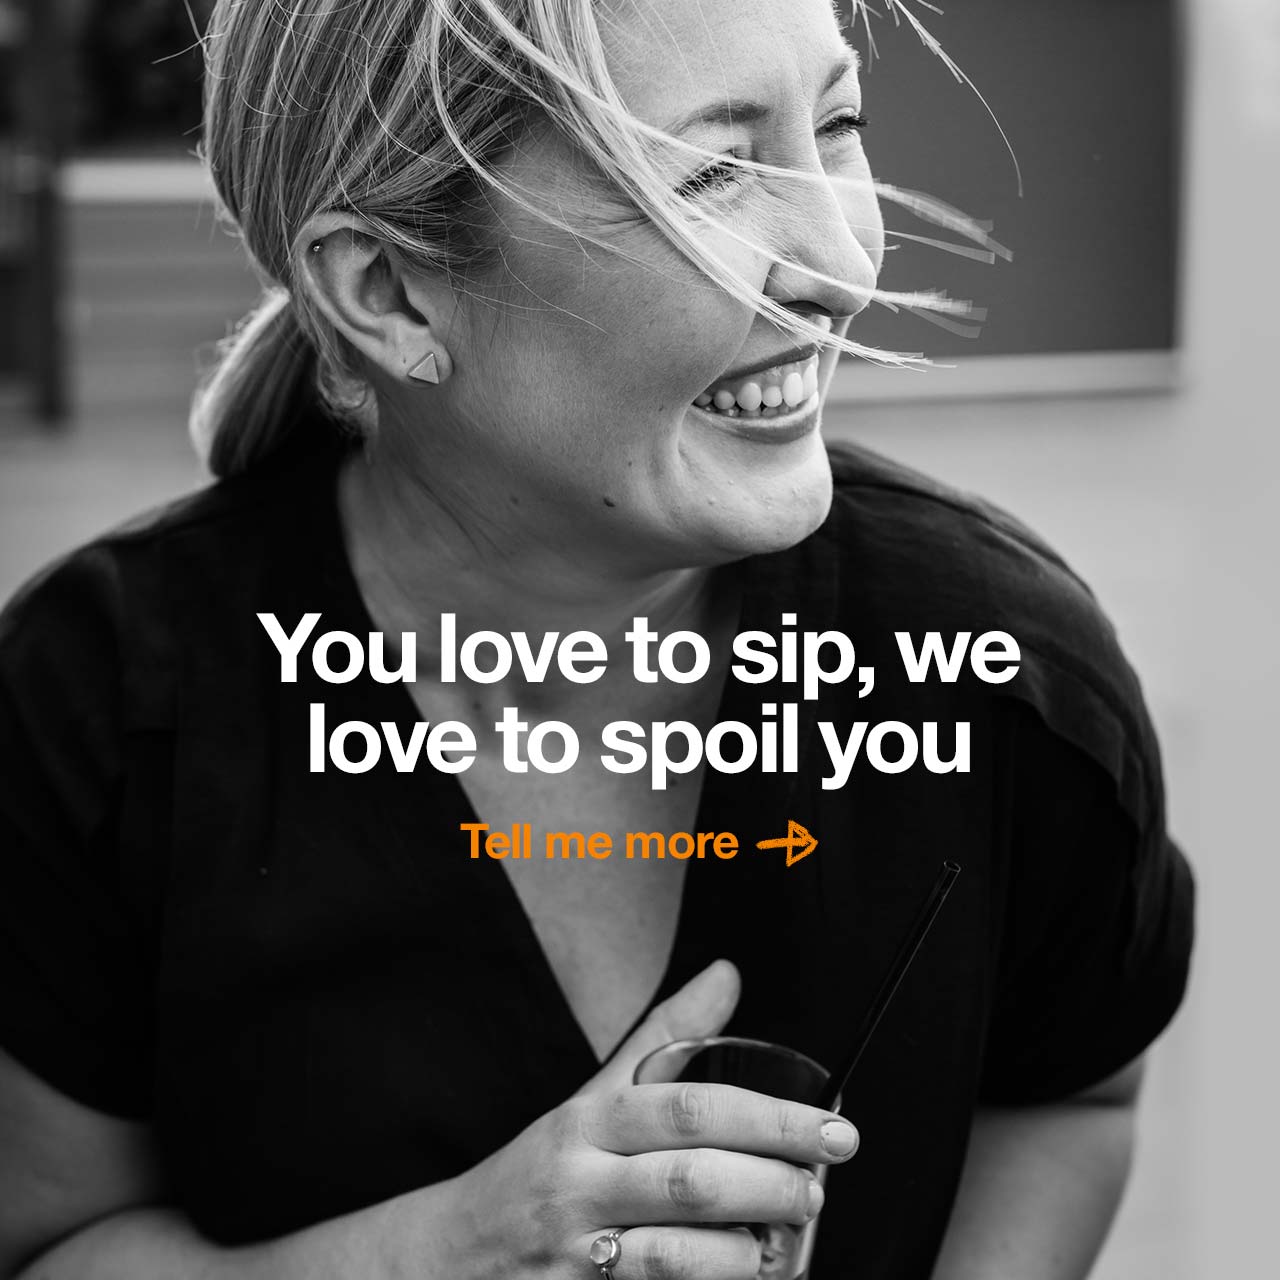 You love to sip, we love to spoil you. Tell me more.